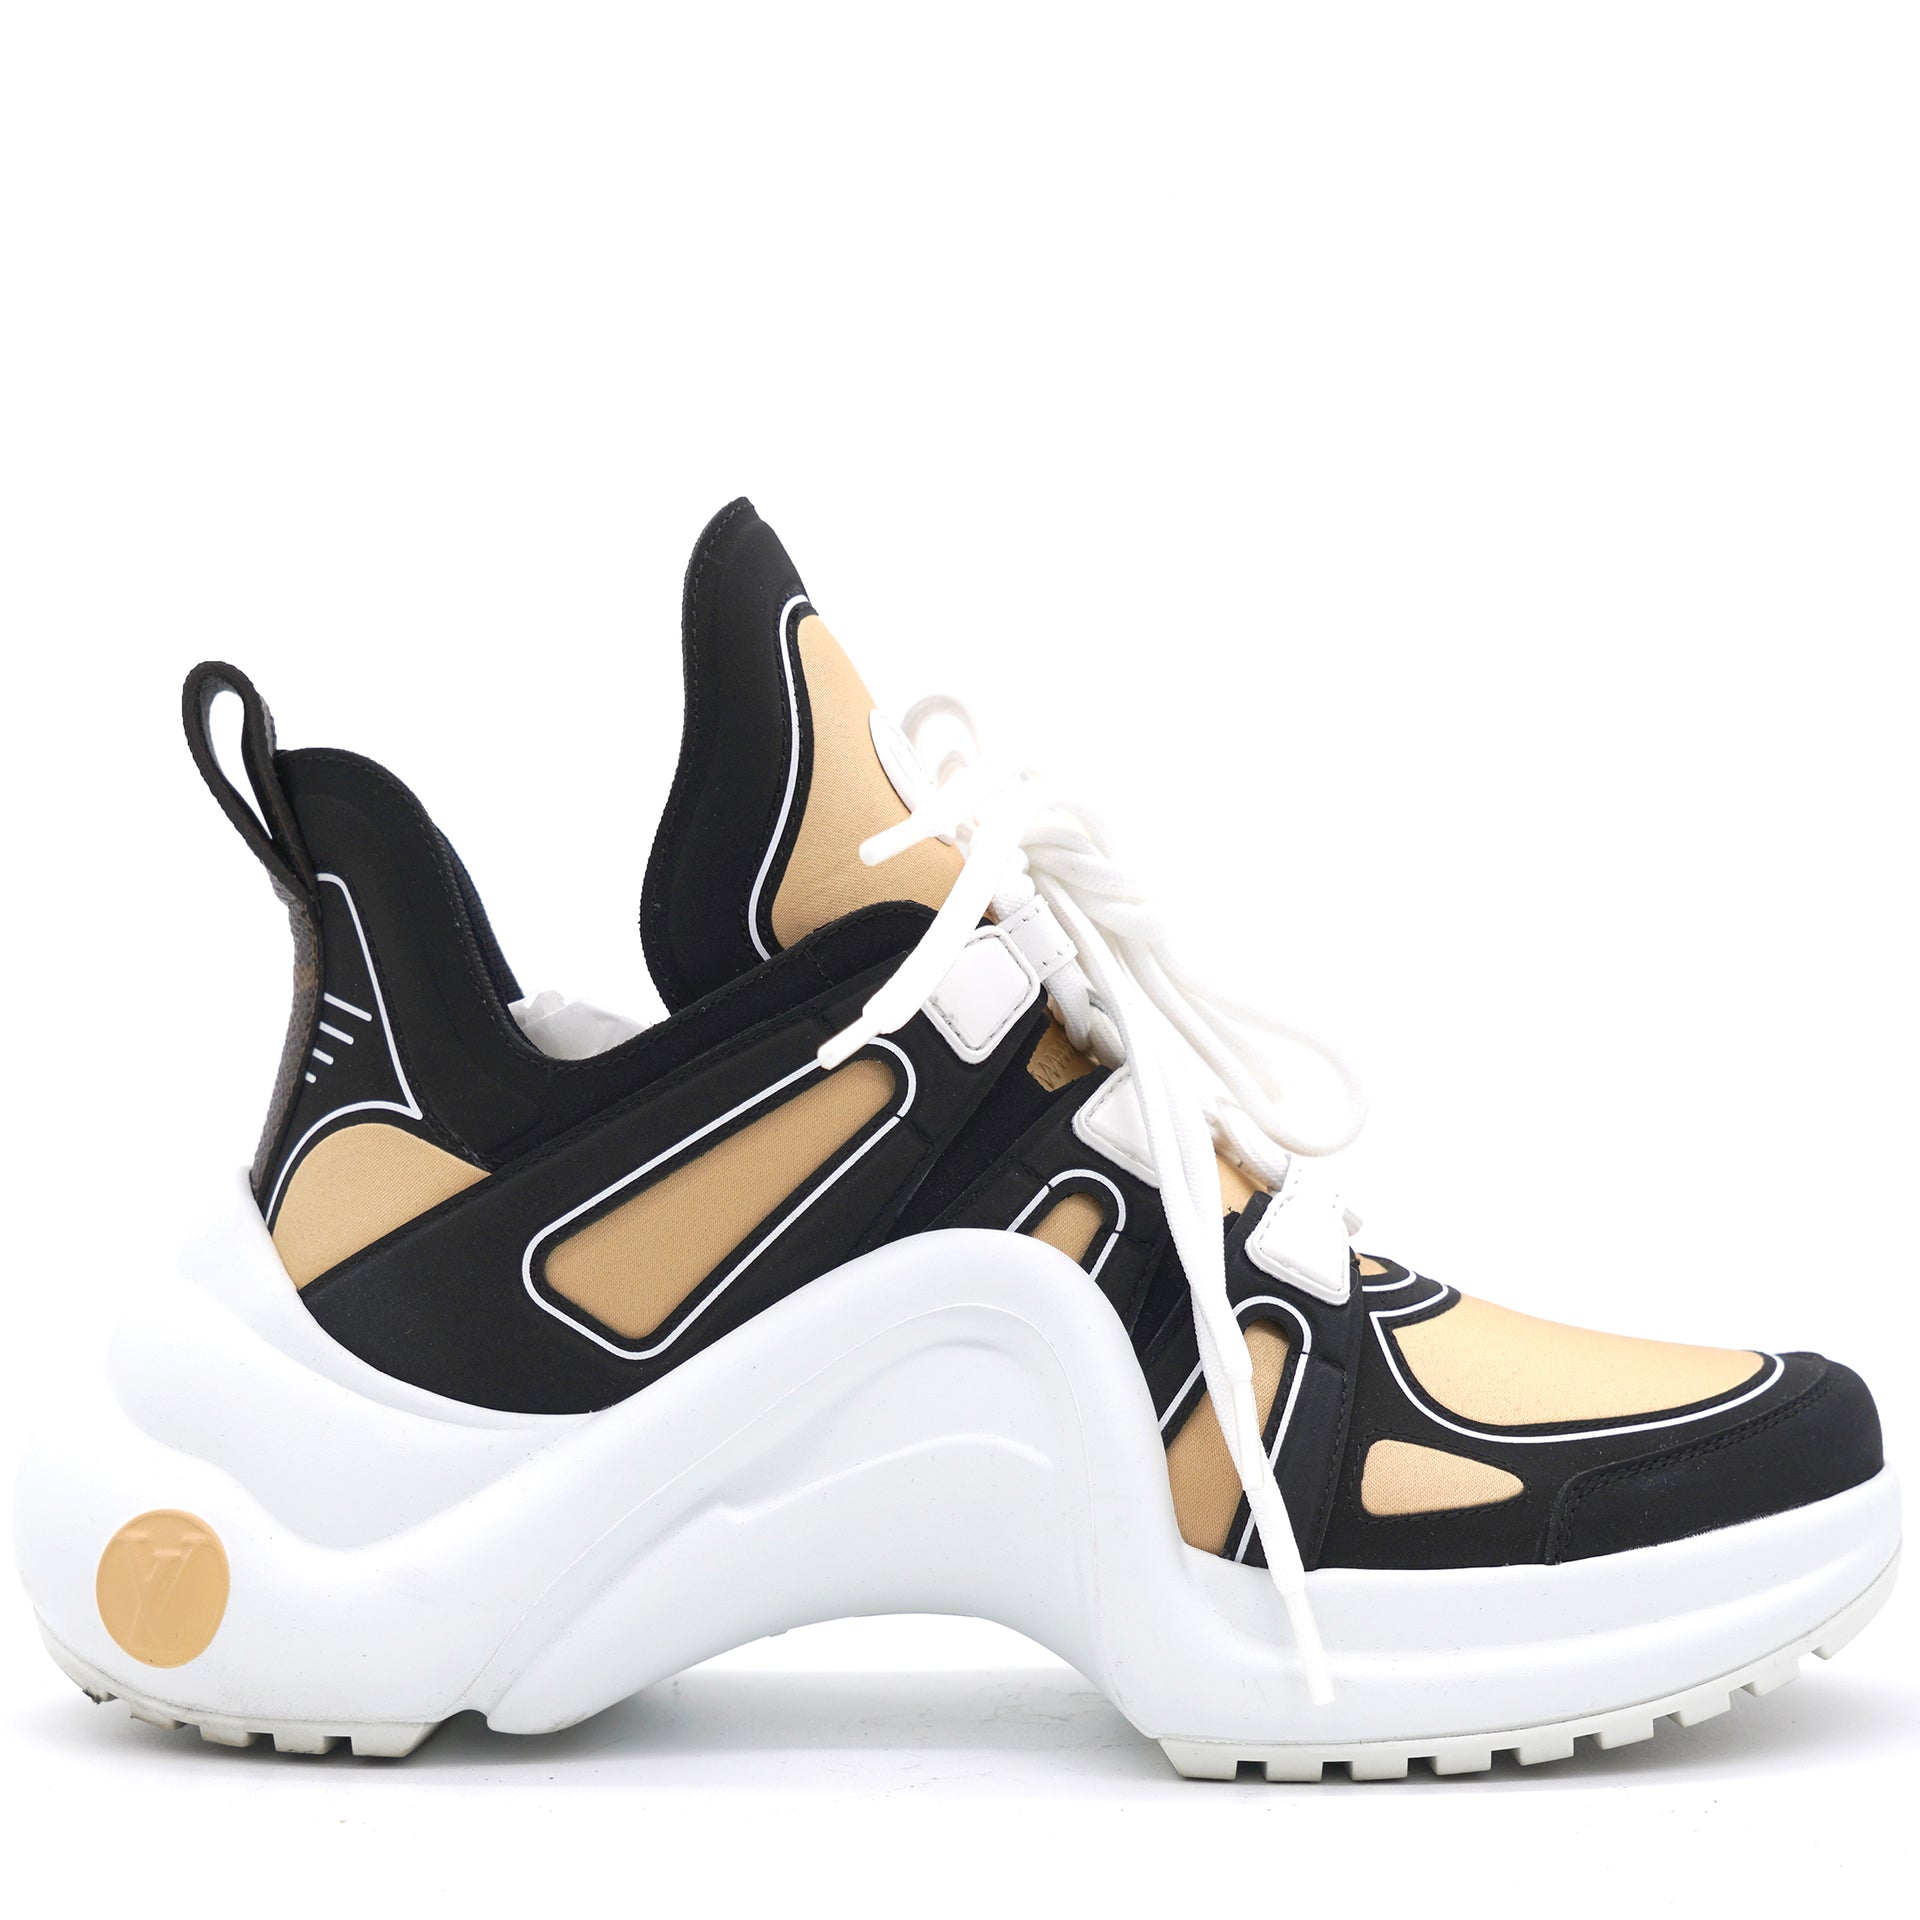 Buy Louis Vuitton Archlight Shoes New Releases  Iconic Styles  GOAT